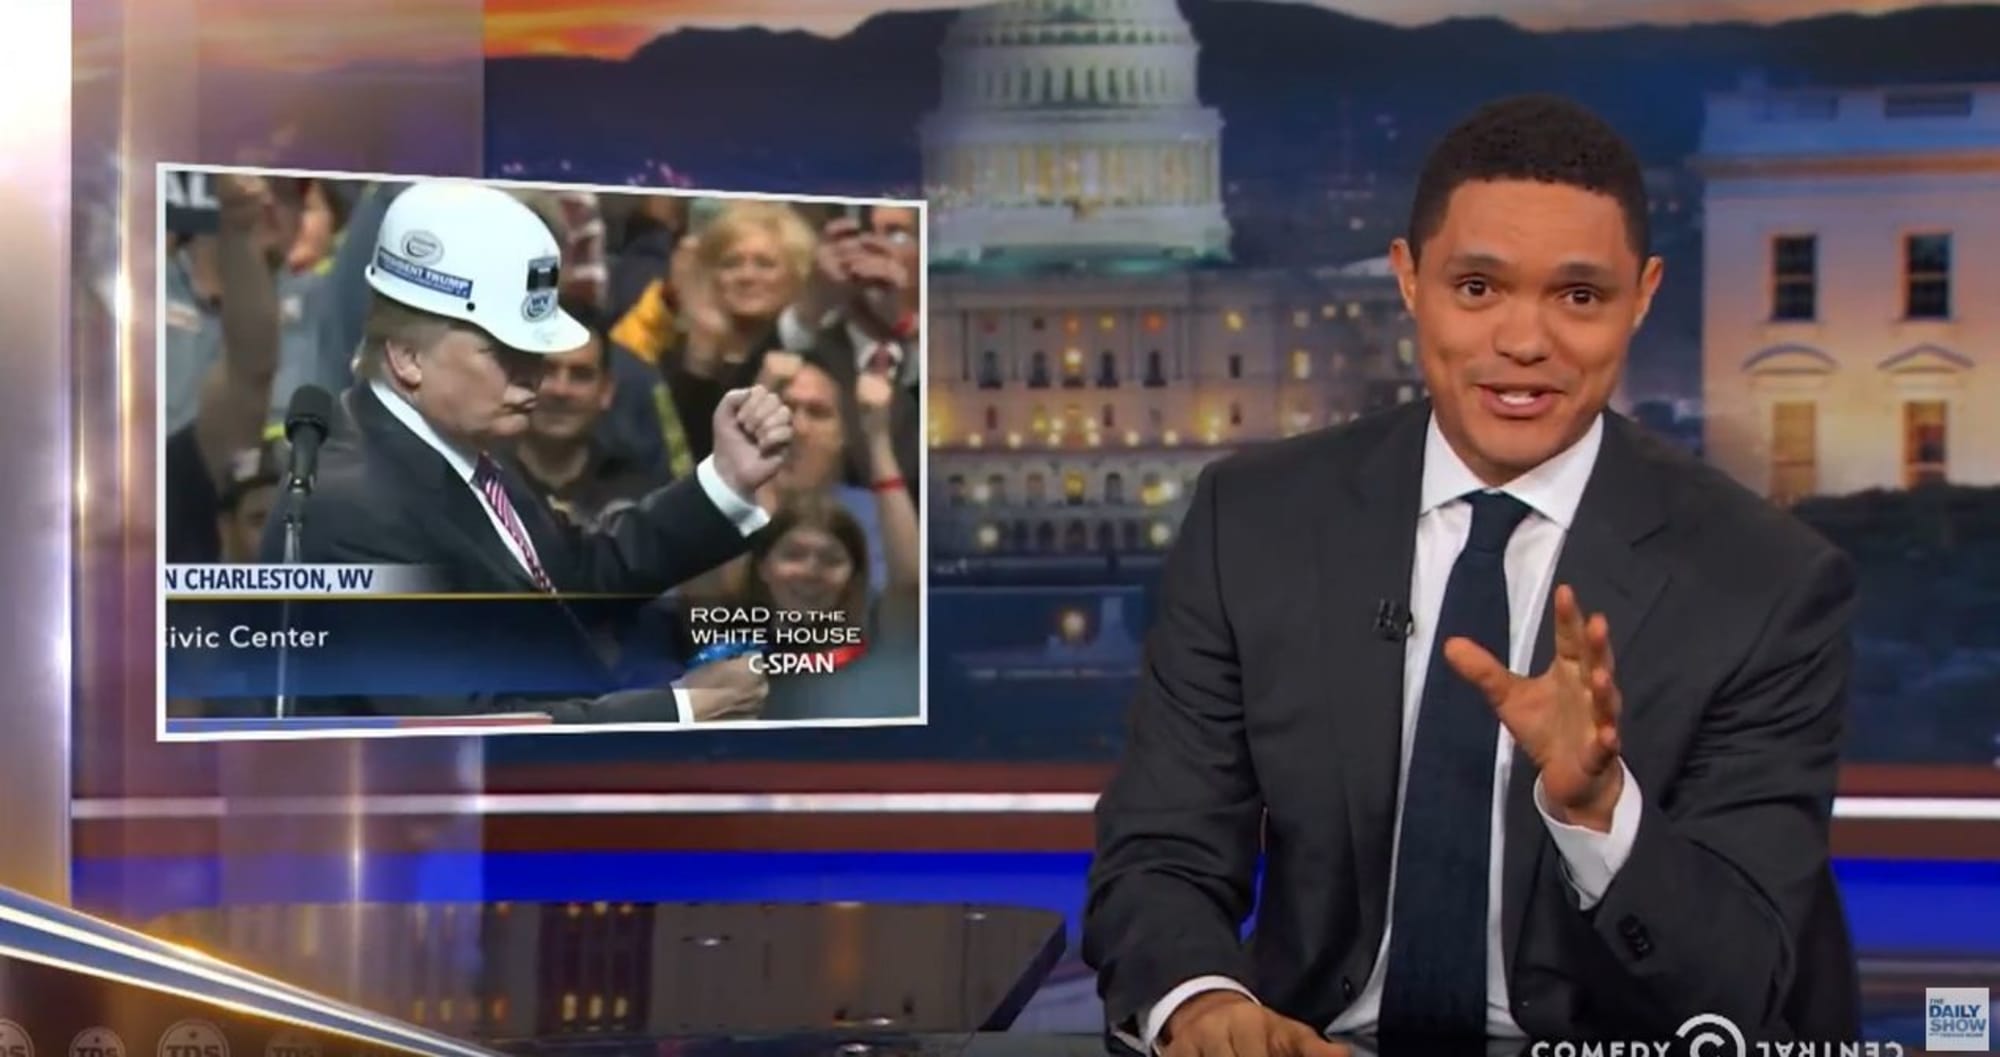 The Daily Show ratings hit new high since Trevor Noah replaced Jon Stewart